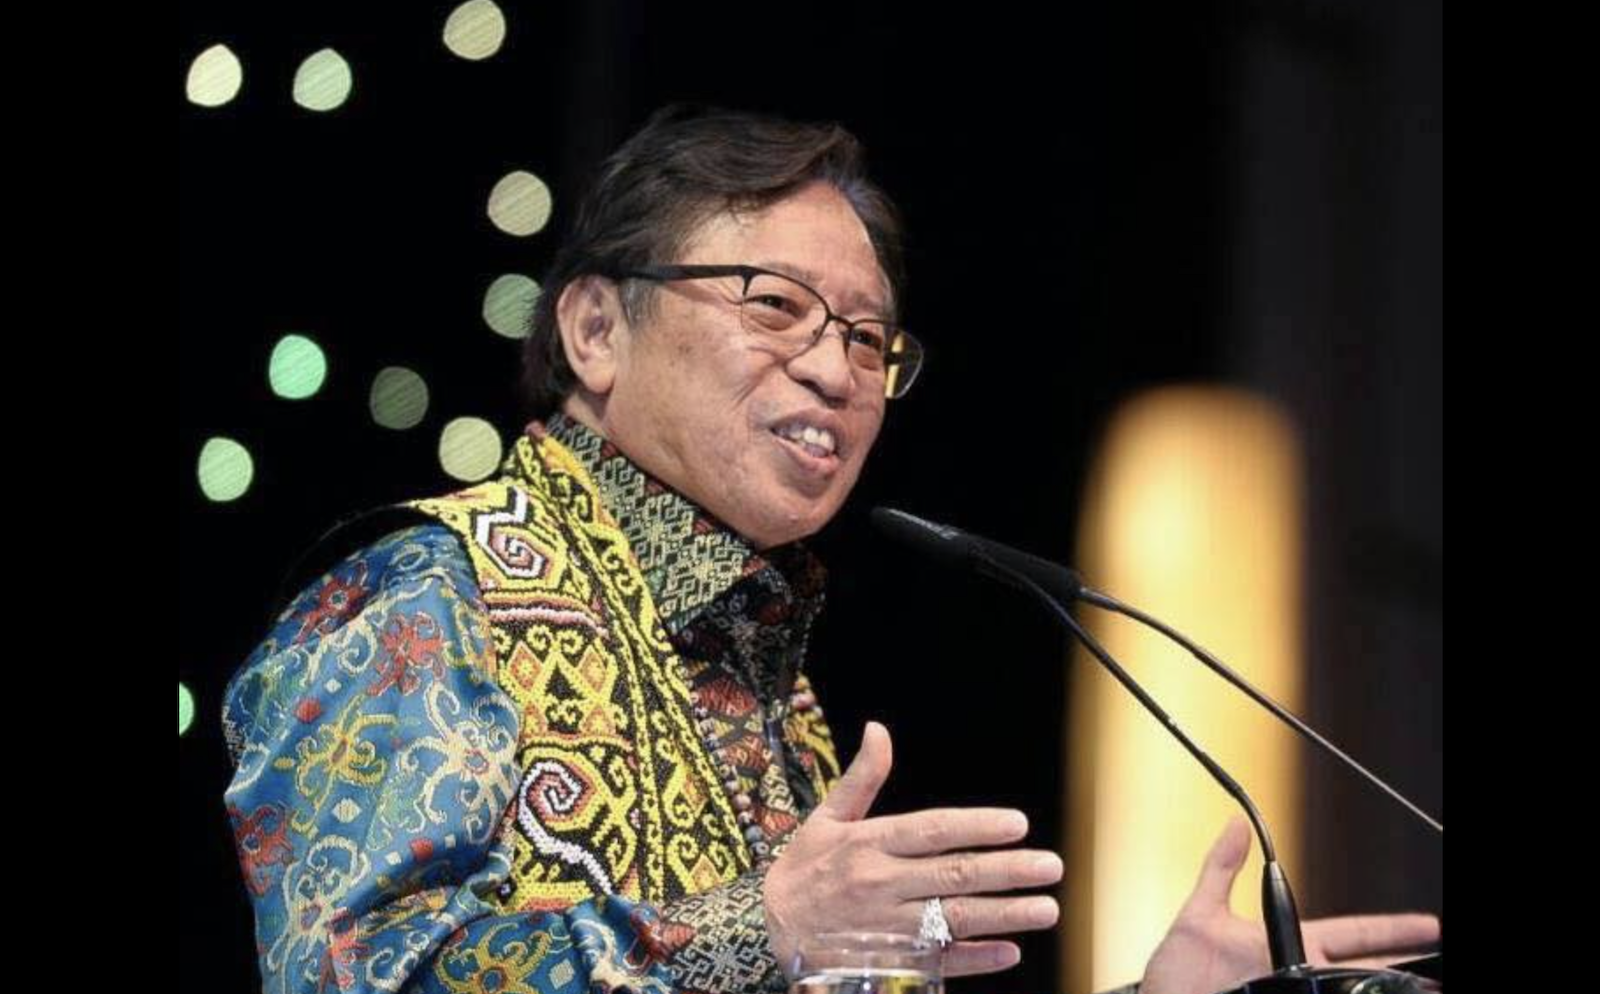 peninsular malaysia has lost the unity plot; are sabah and sarawak ready to lead?